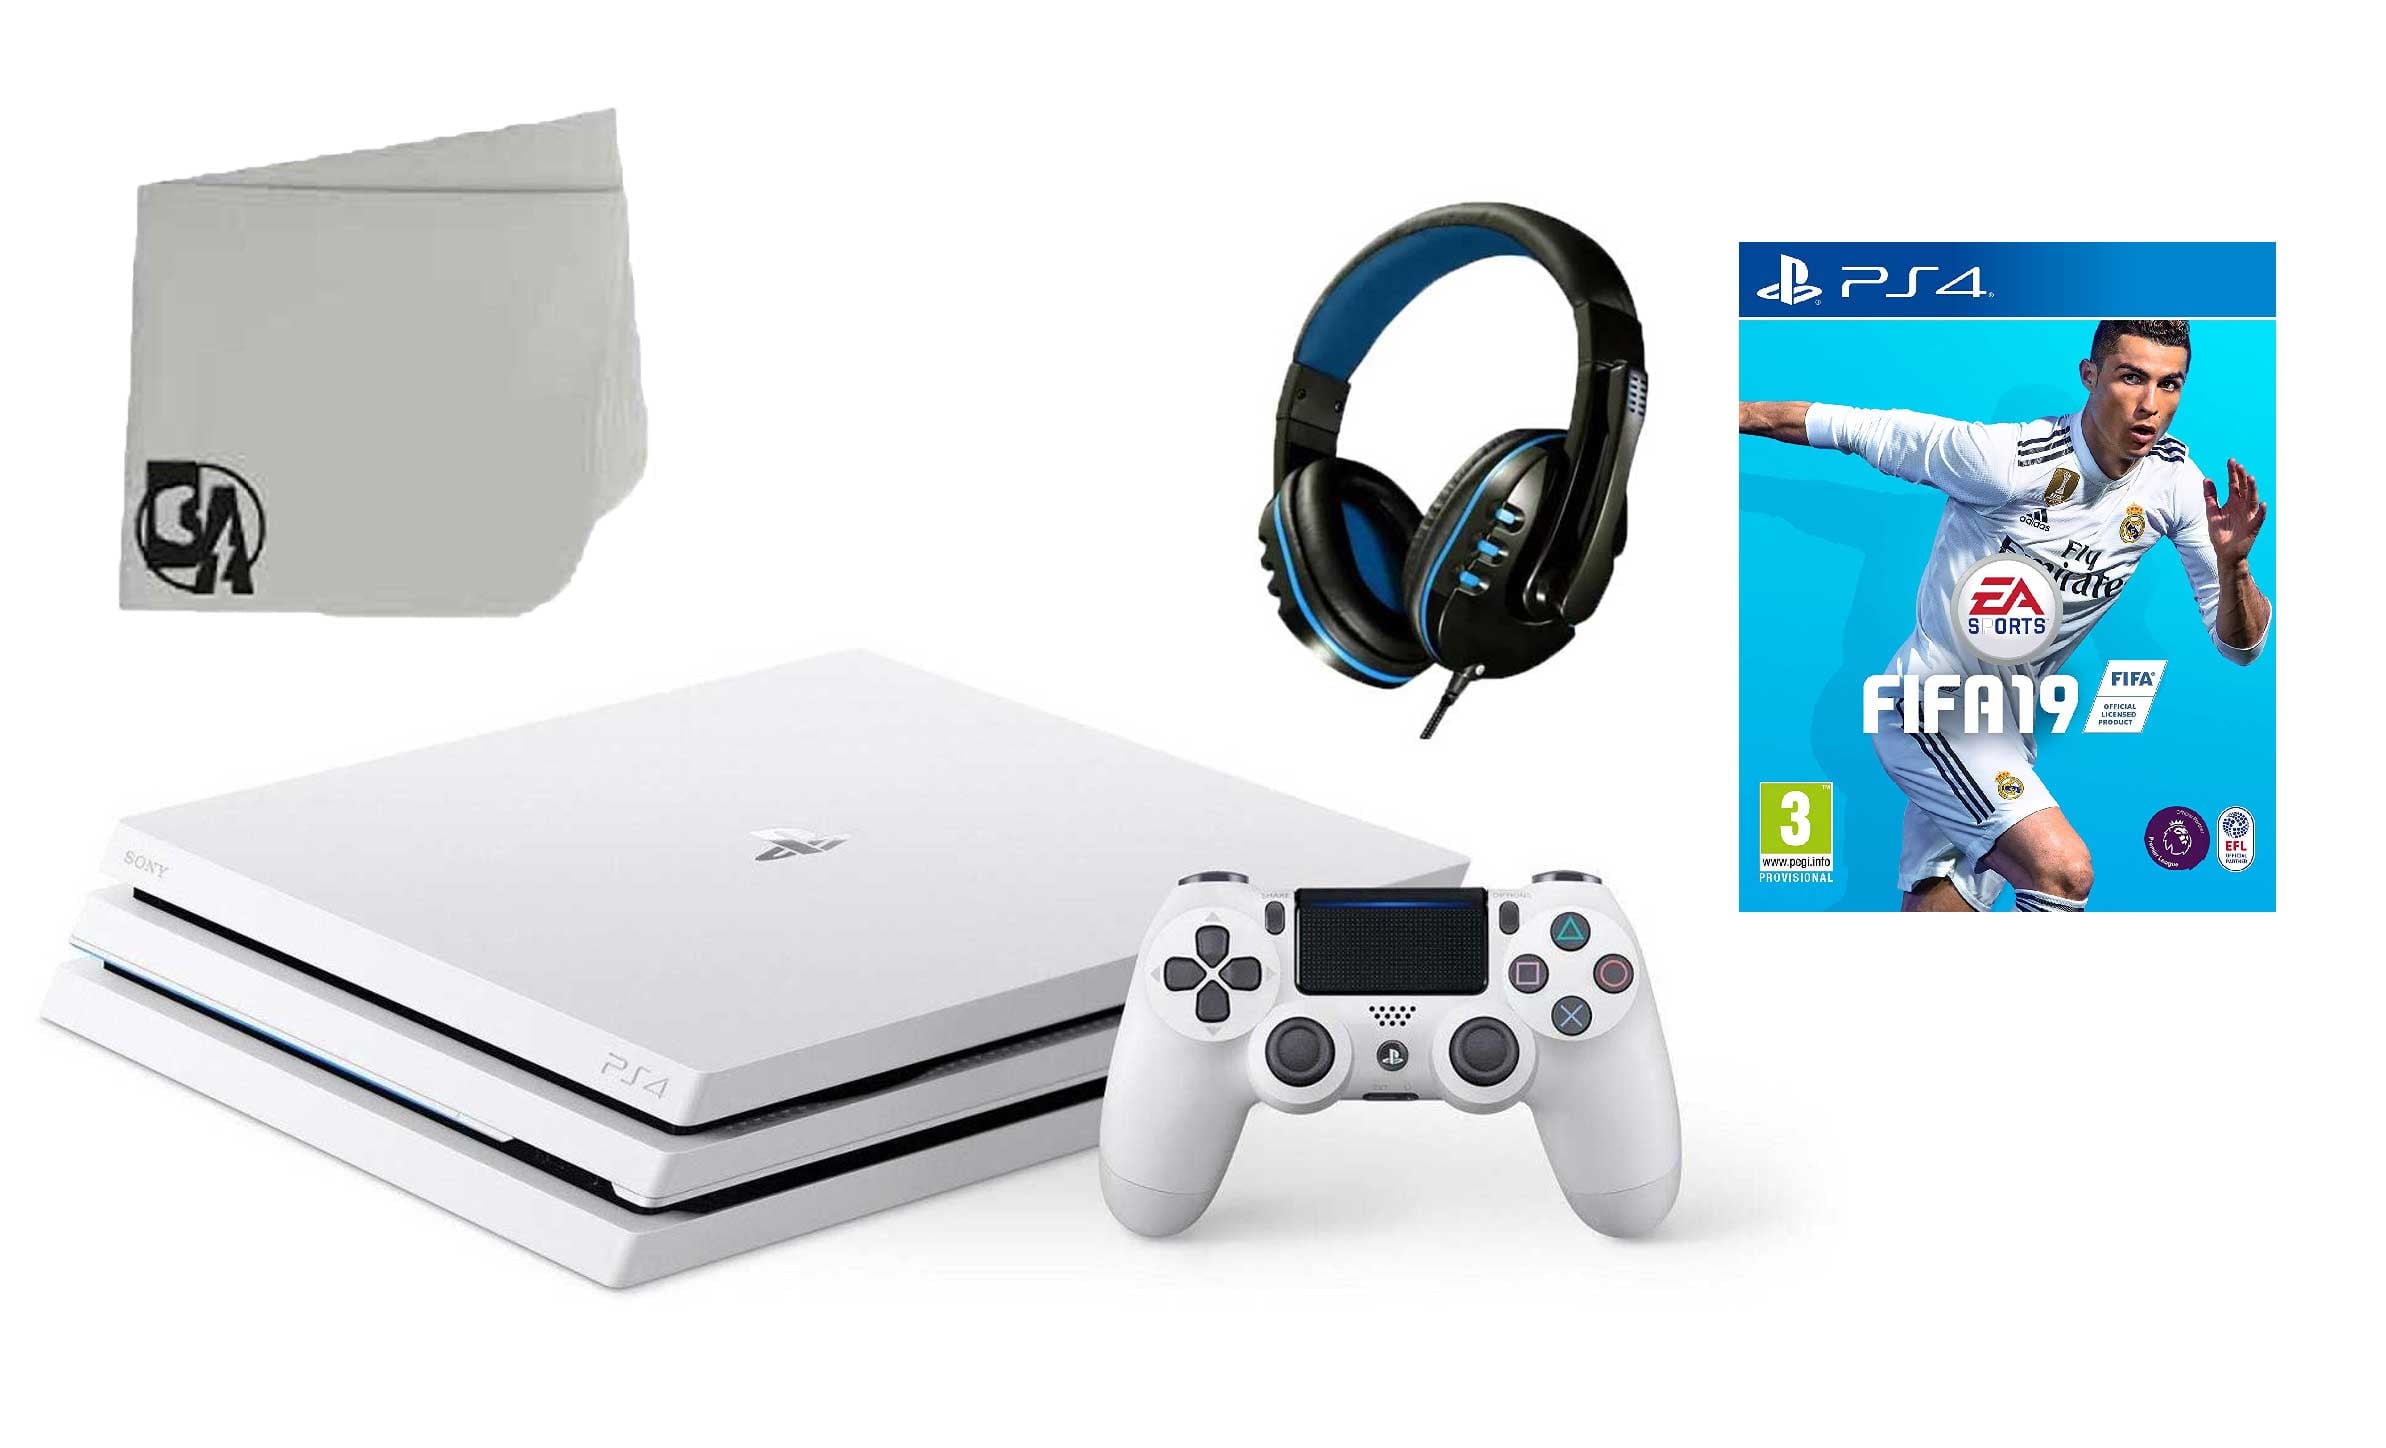 Sony PS4 PRO 1TB Console FIFA 24 Game 2 Controller Bundle 1 Year warranty  Unboxed - Games N Gadget